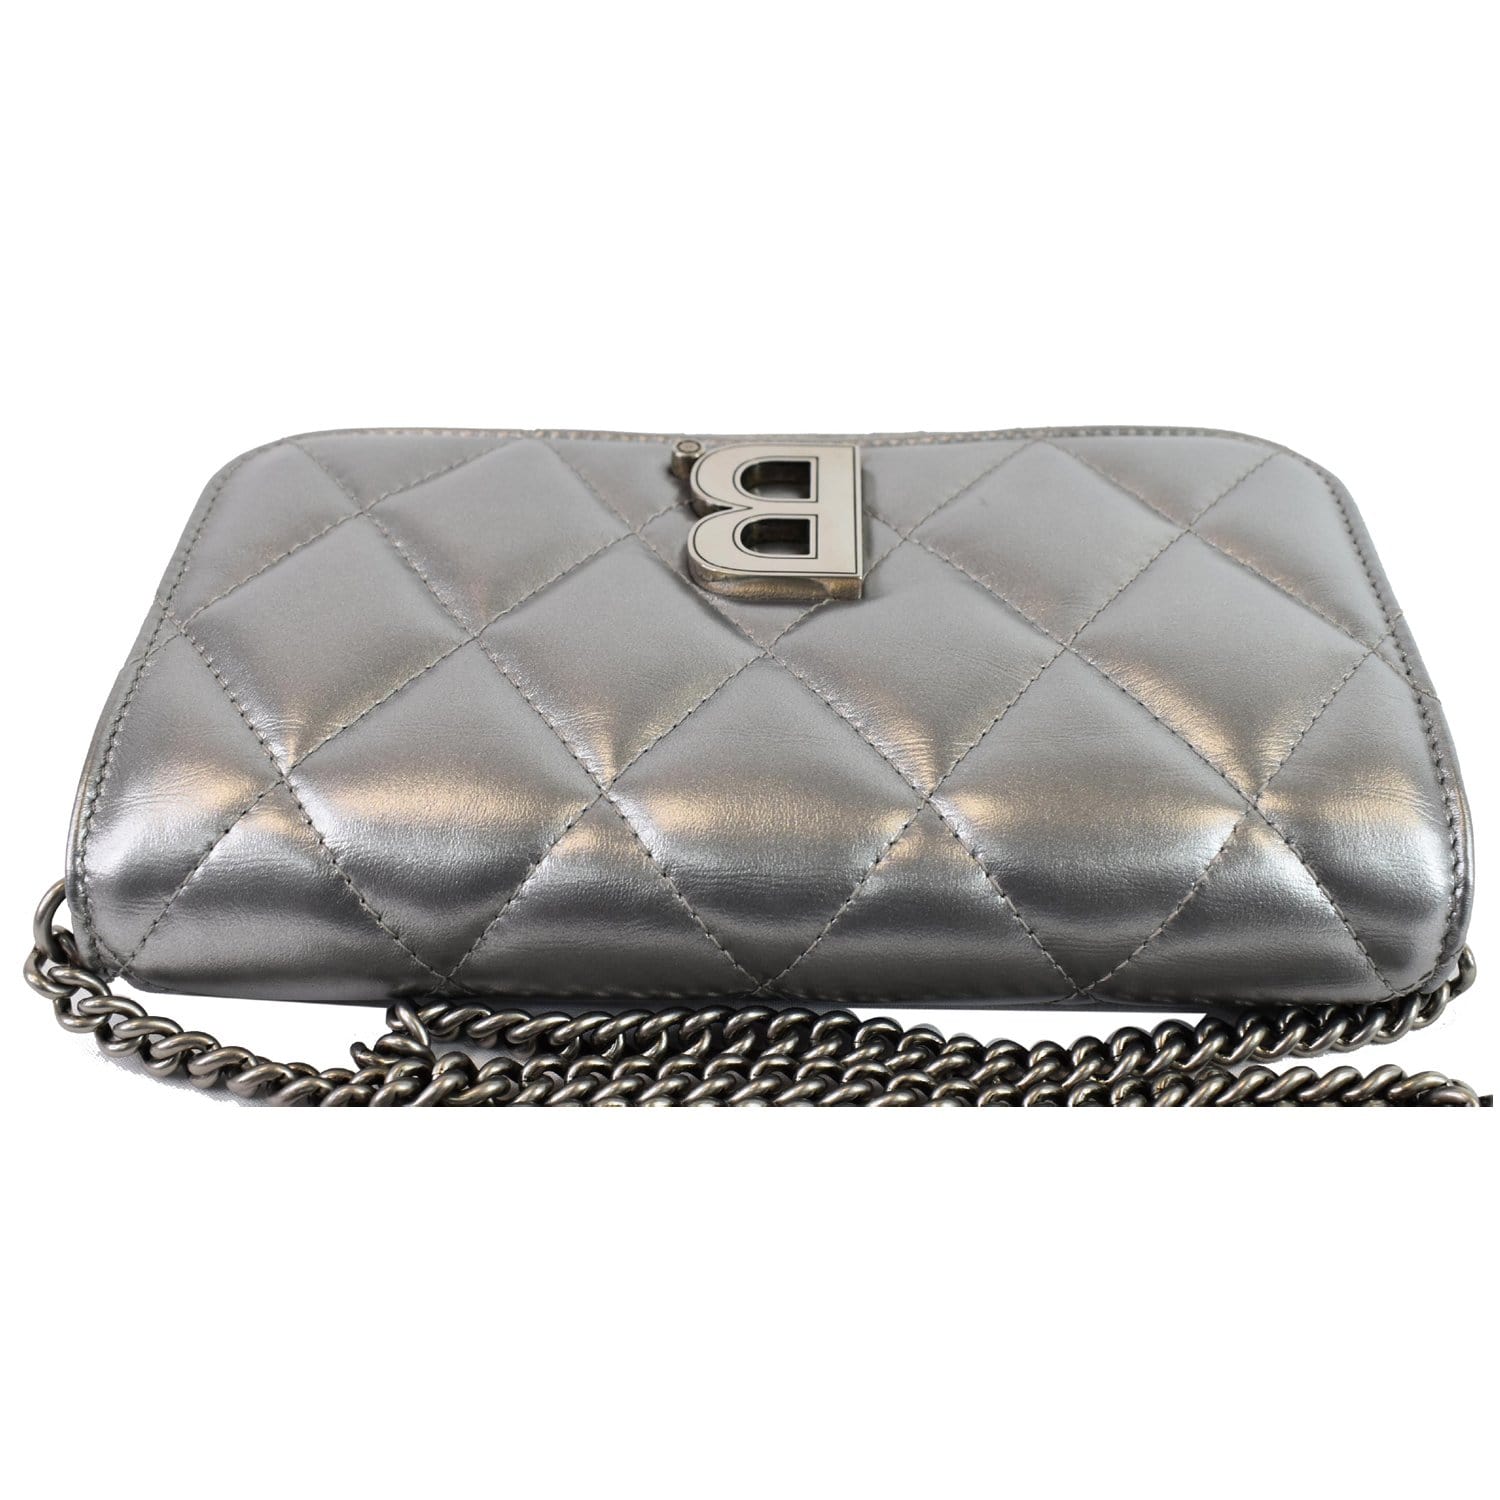 Balenciaga - Authenticated Bb Chain Clutch Bag - Leather Beige Plain for Women, Very Good Condition